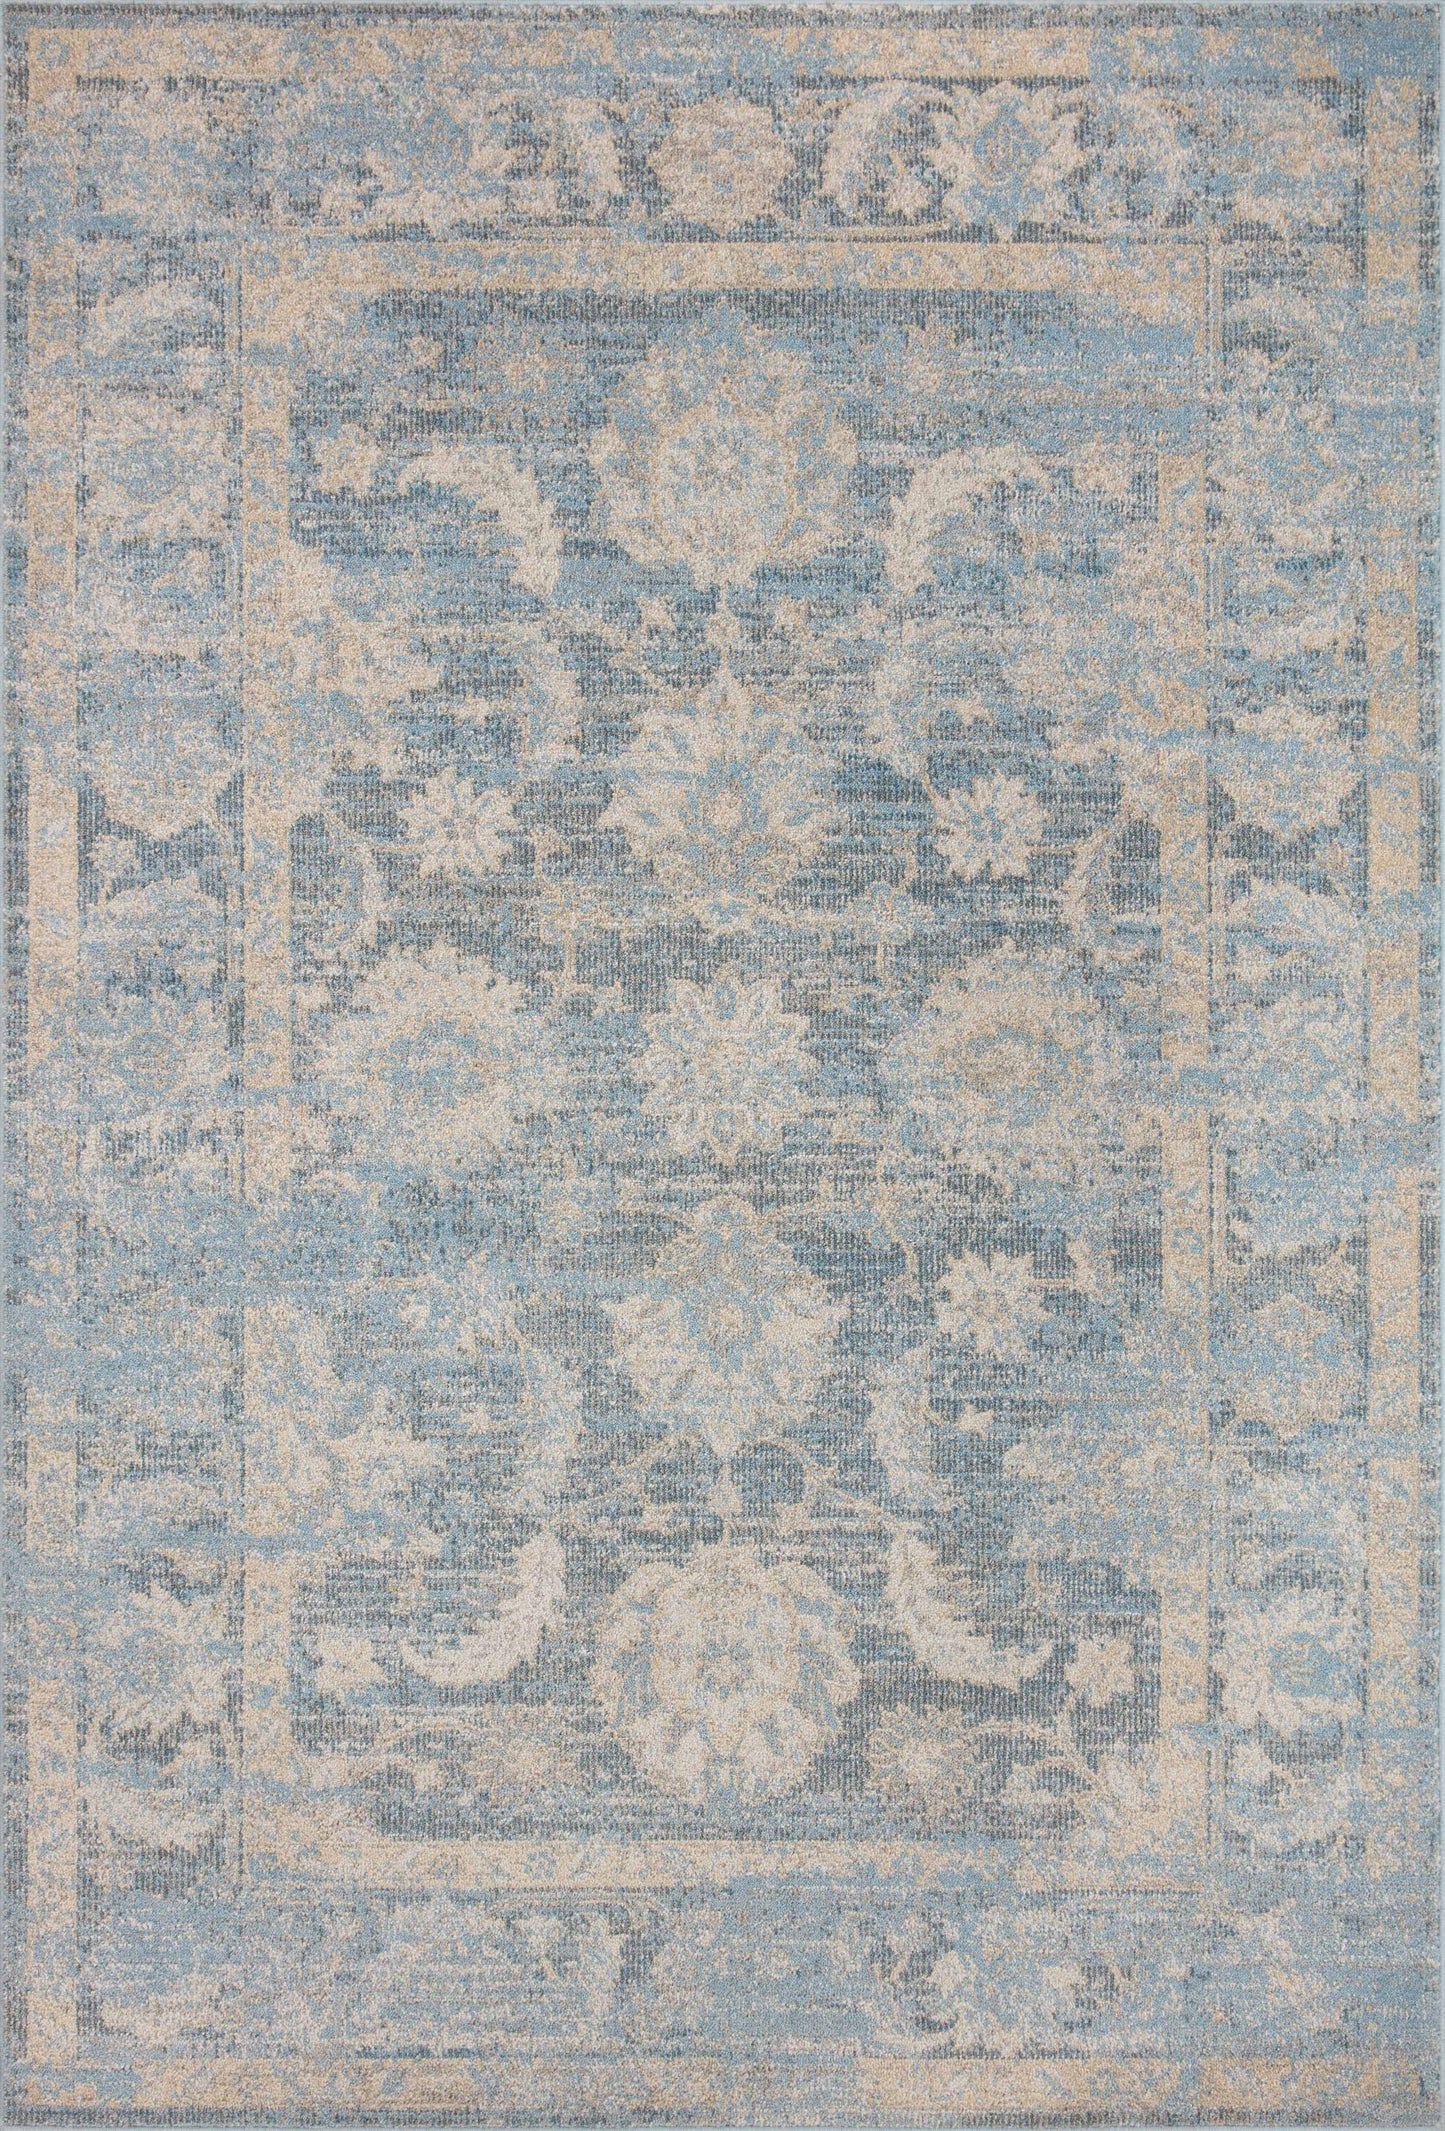 A picture of Loloi's Odette rug, in style ODT-03, color Sky / Beige